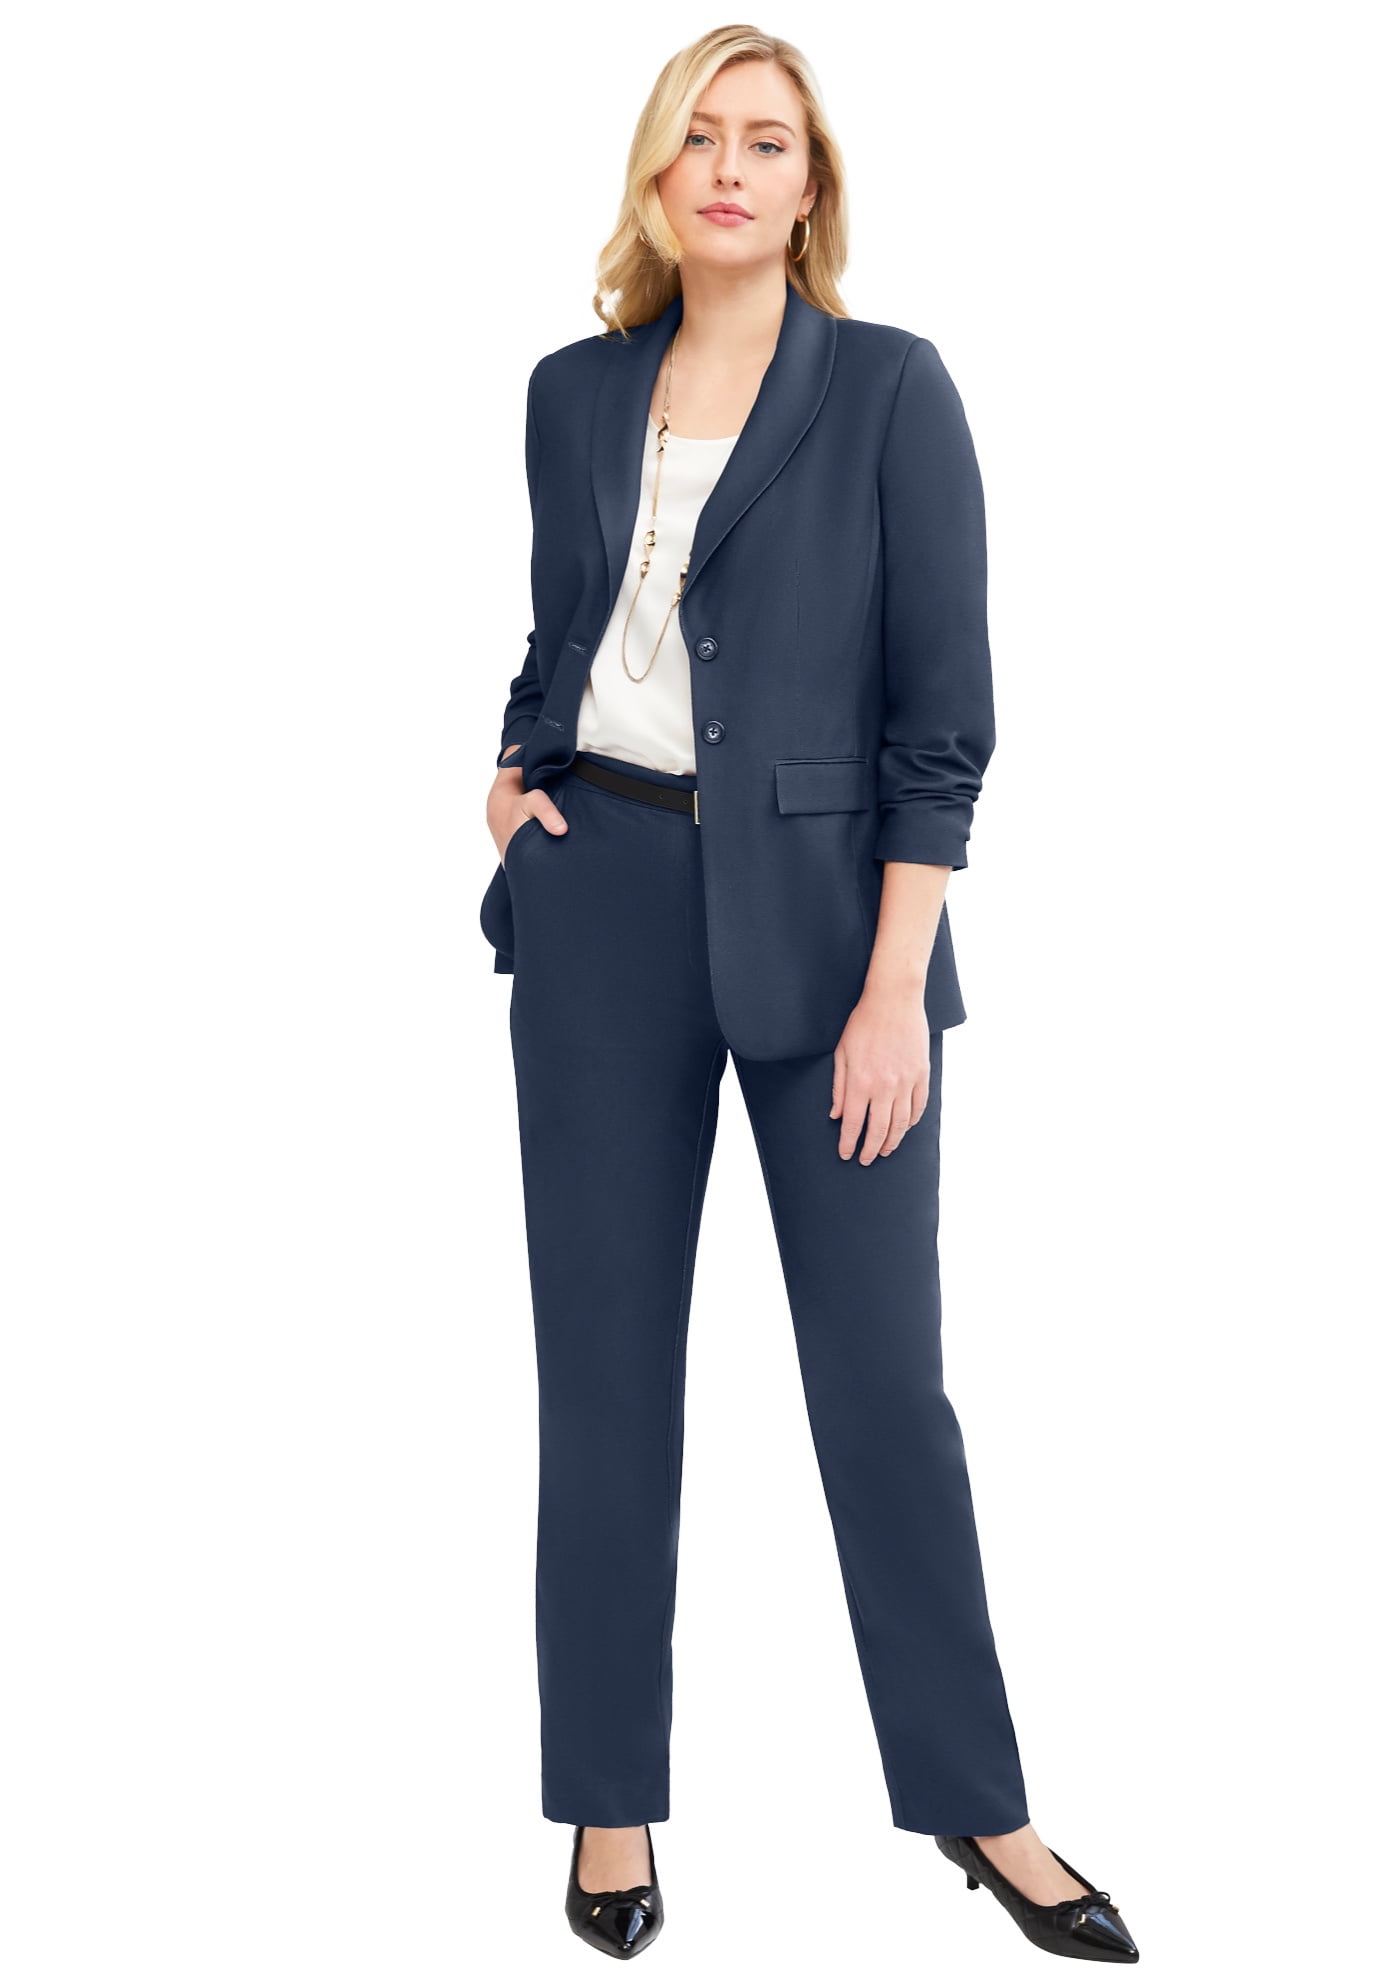 Jessica London Women's Plus Size Two Piece Single Breasted Pant Suit Set -  34 W, Navy Blue